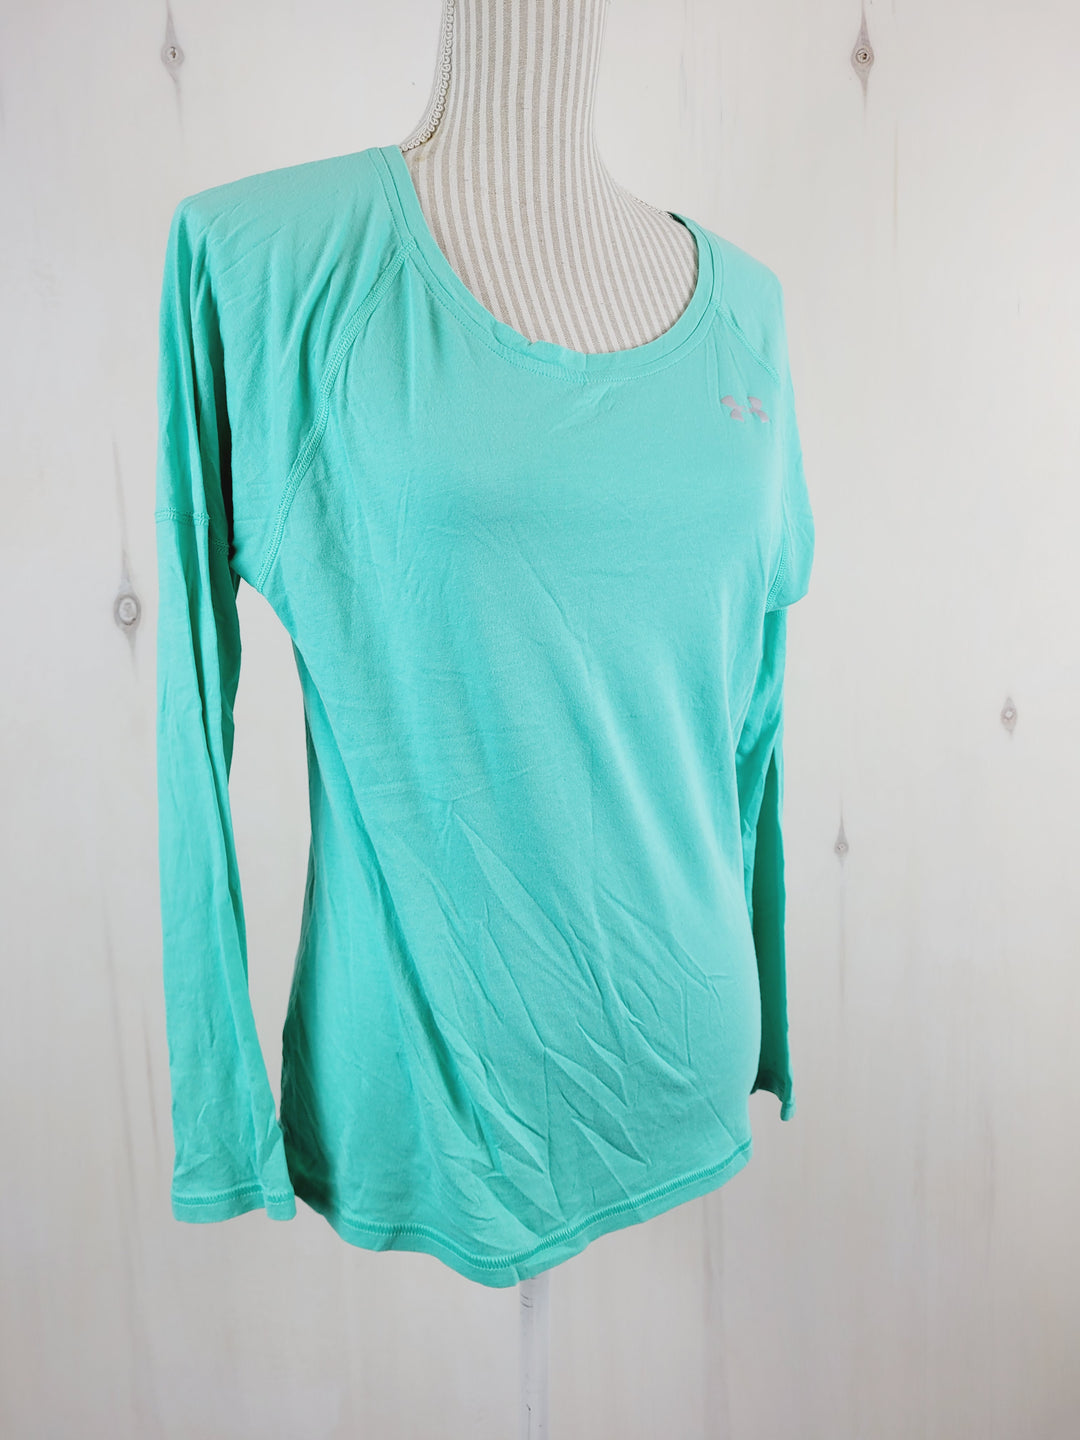 UNDER ARMOUR MINT LONG SLEEVE APPROX LADIES LARGE EUC